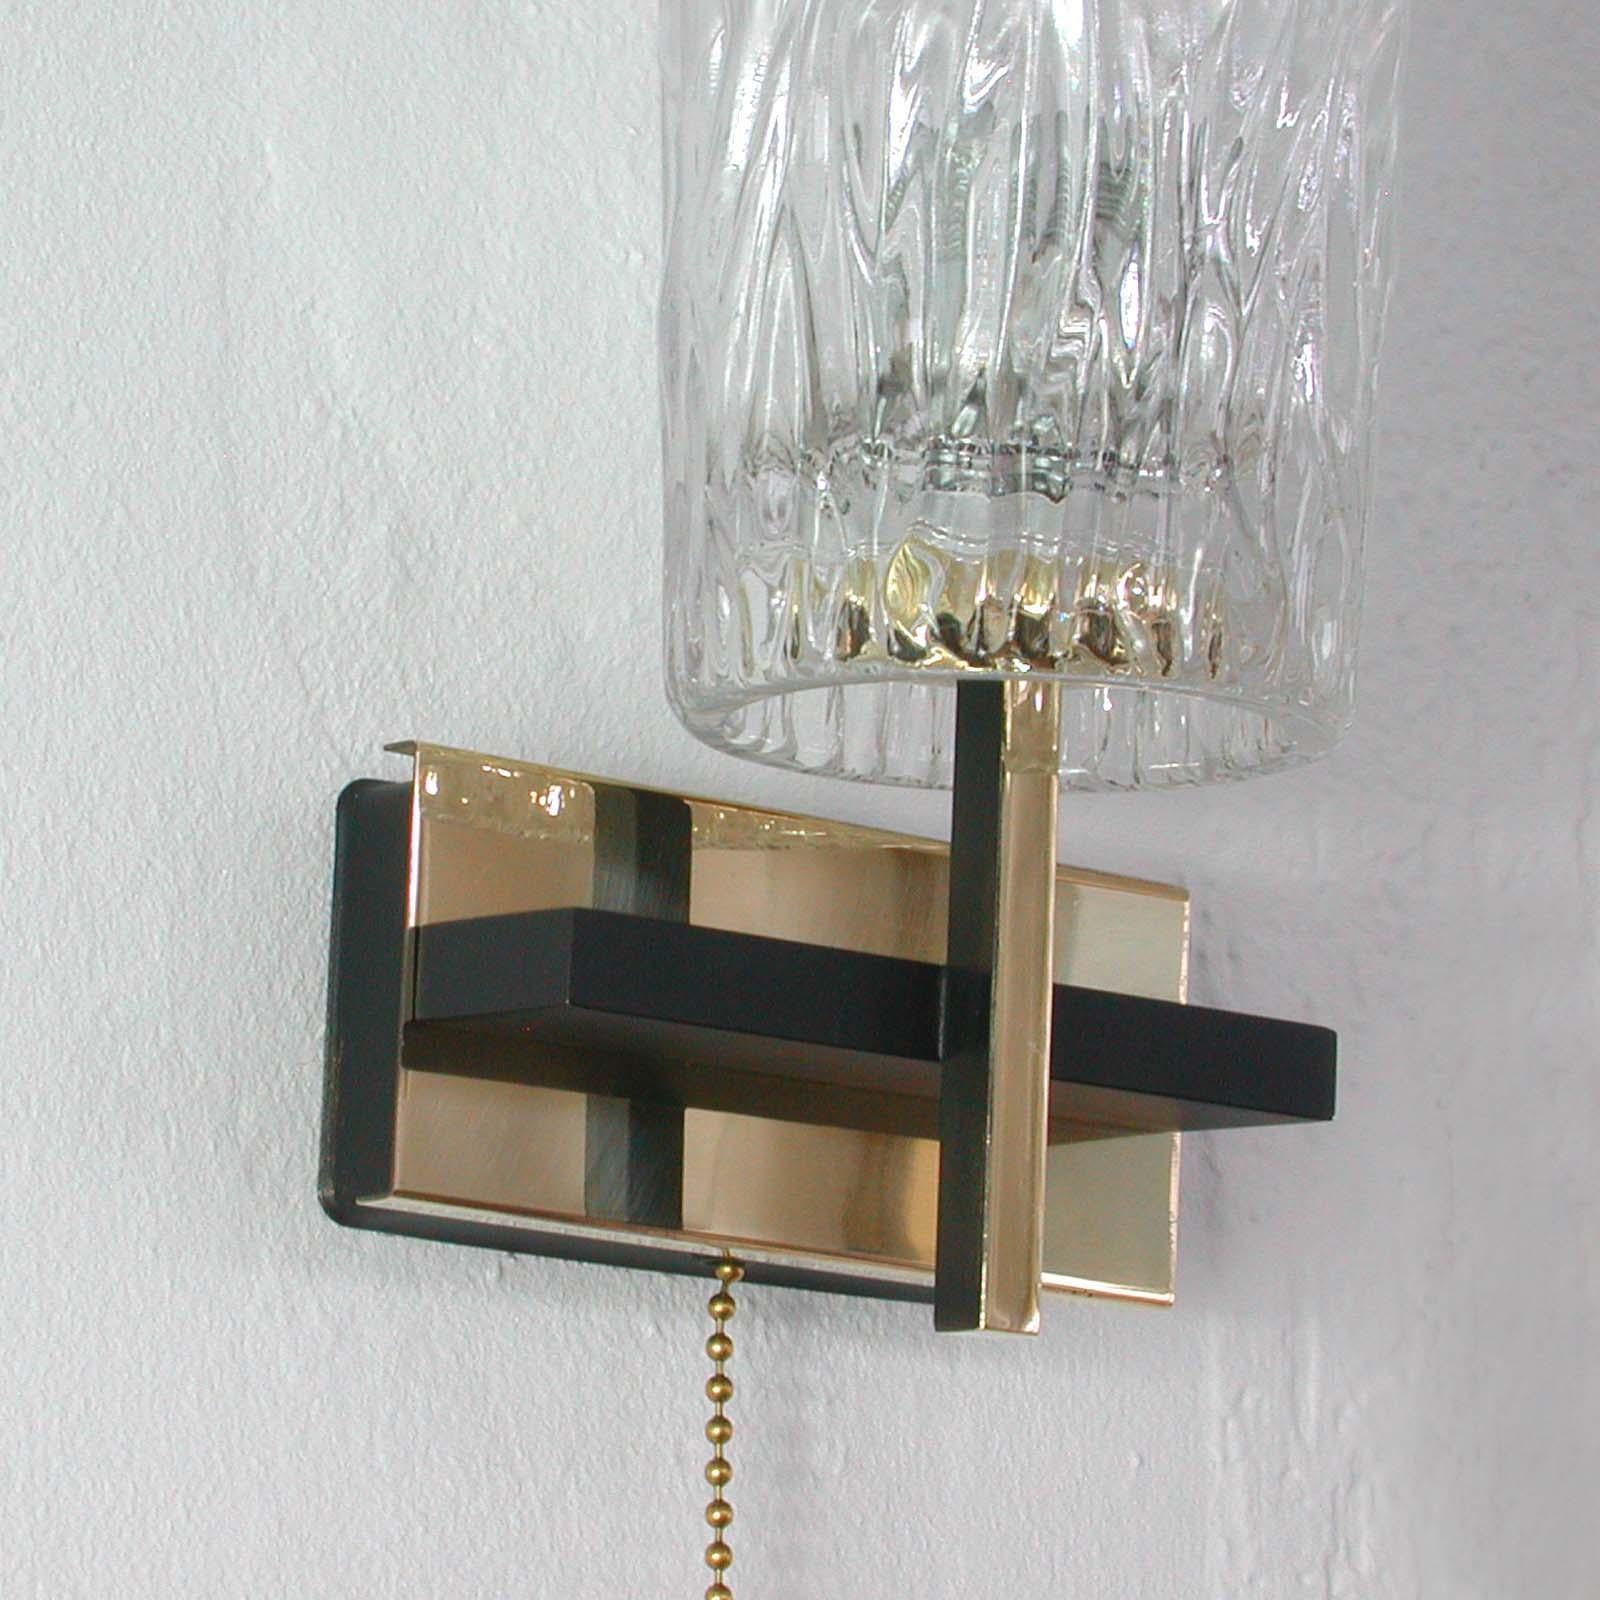 Midcentury French Brass and Textured Glass Sconces by Maison Arlus, 1950s For Sale 6